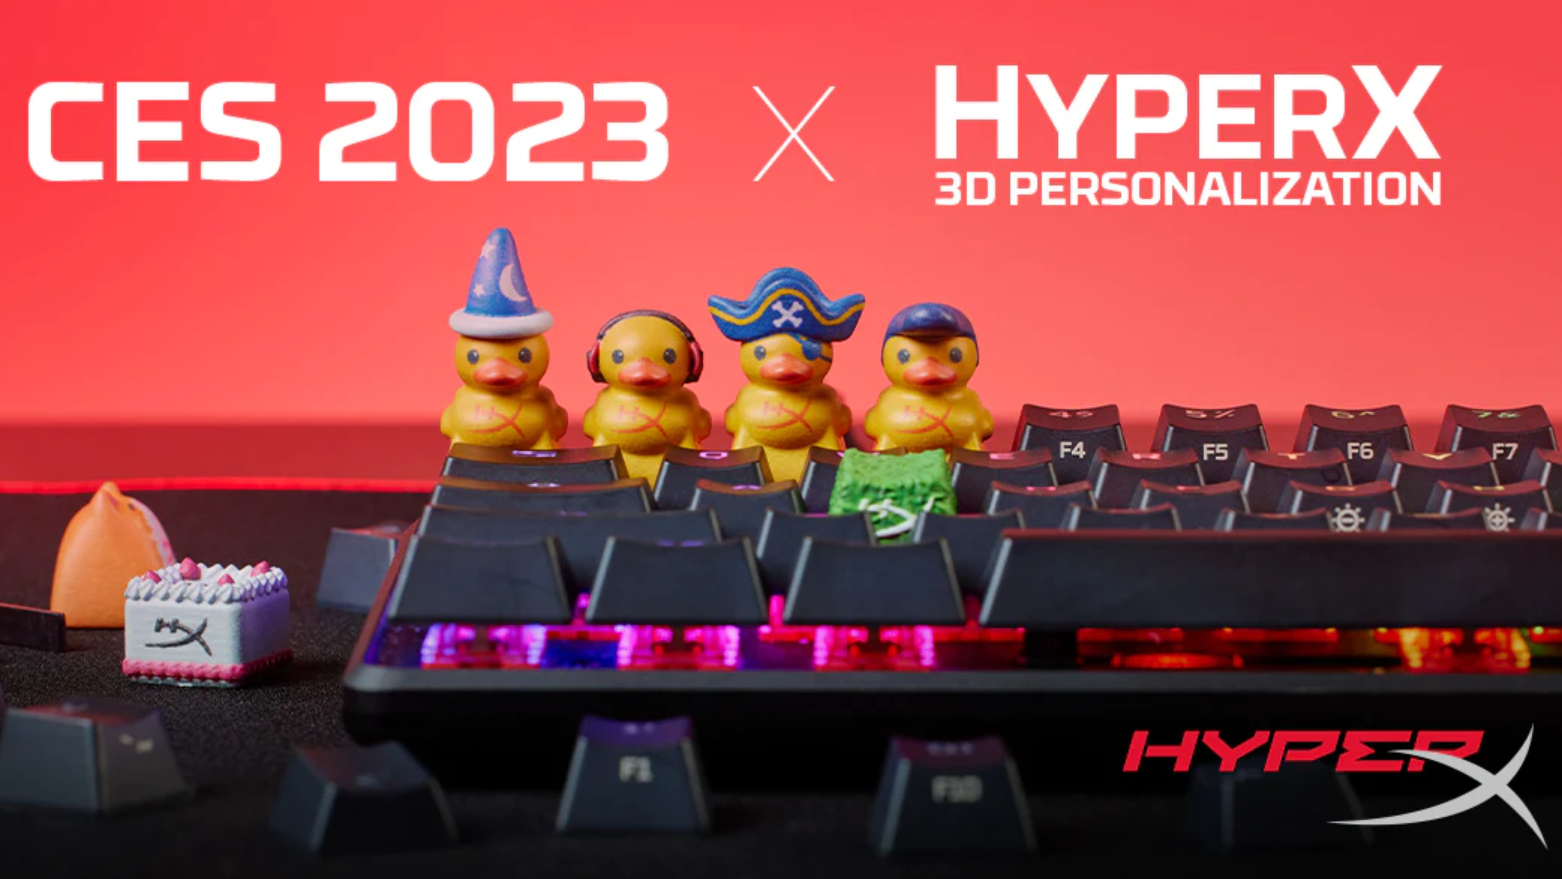 A promotional image for HyperX's HX3D service, featuring several 3D-printed duck keys on top of a keyboard.